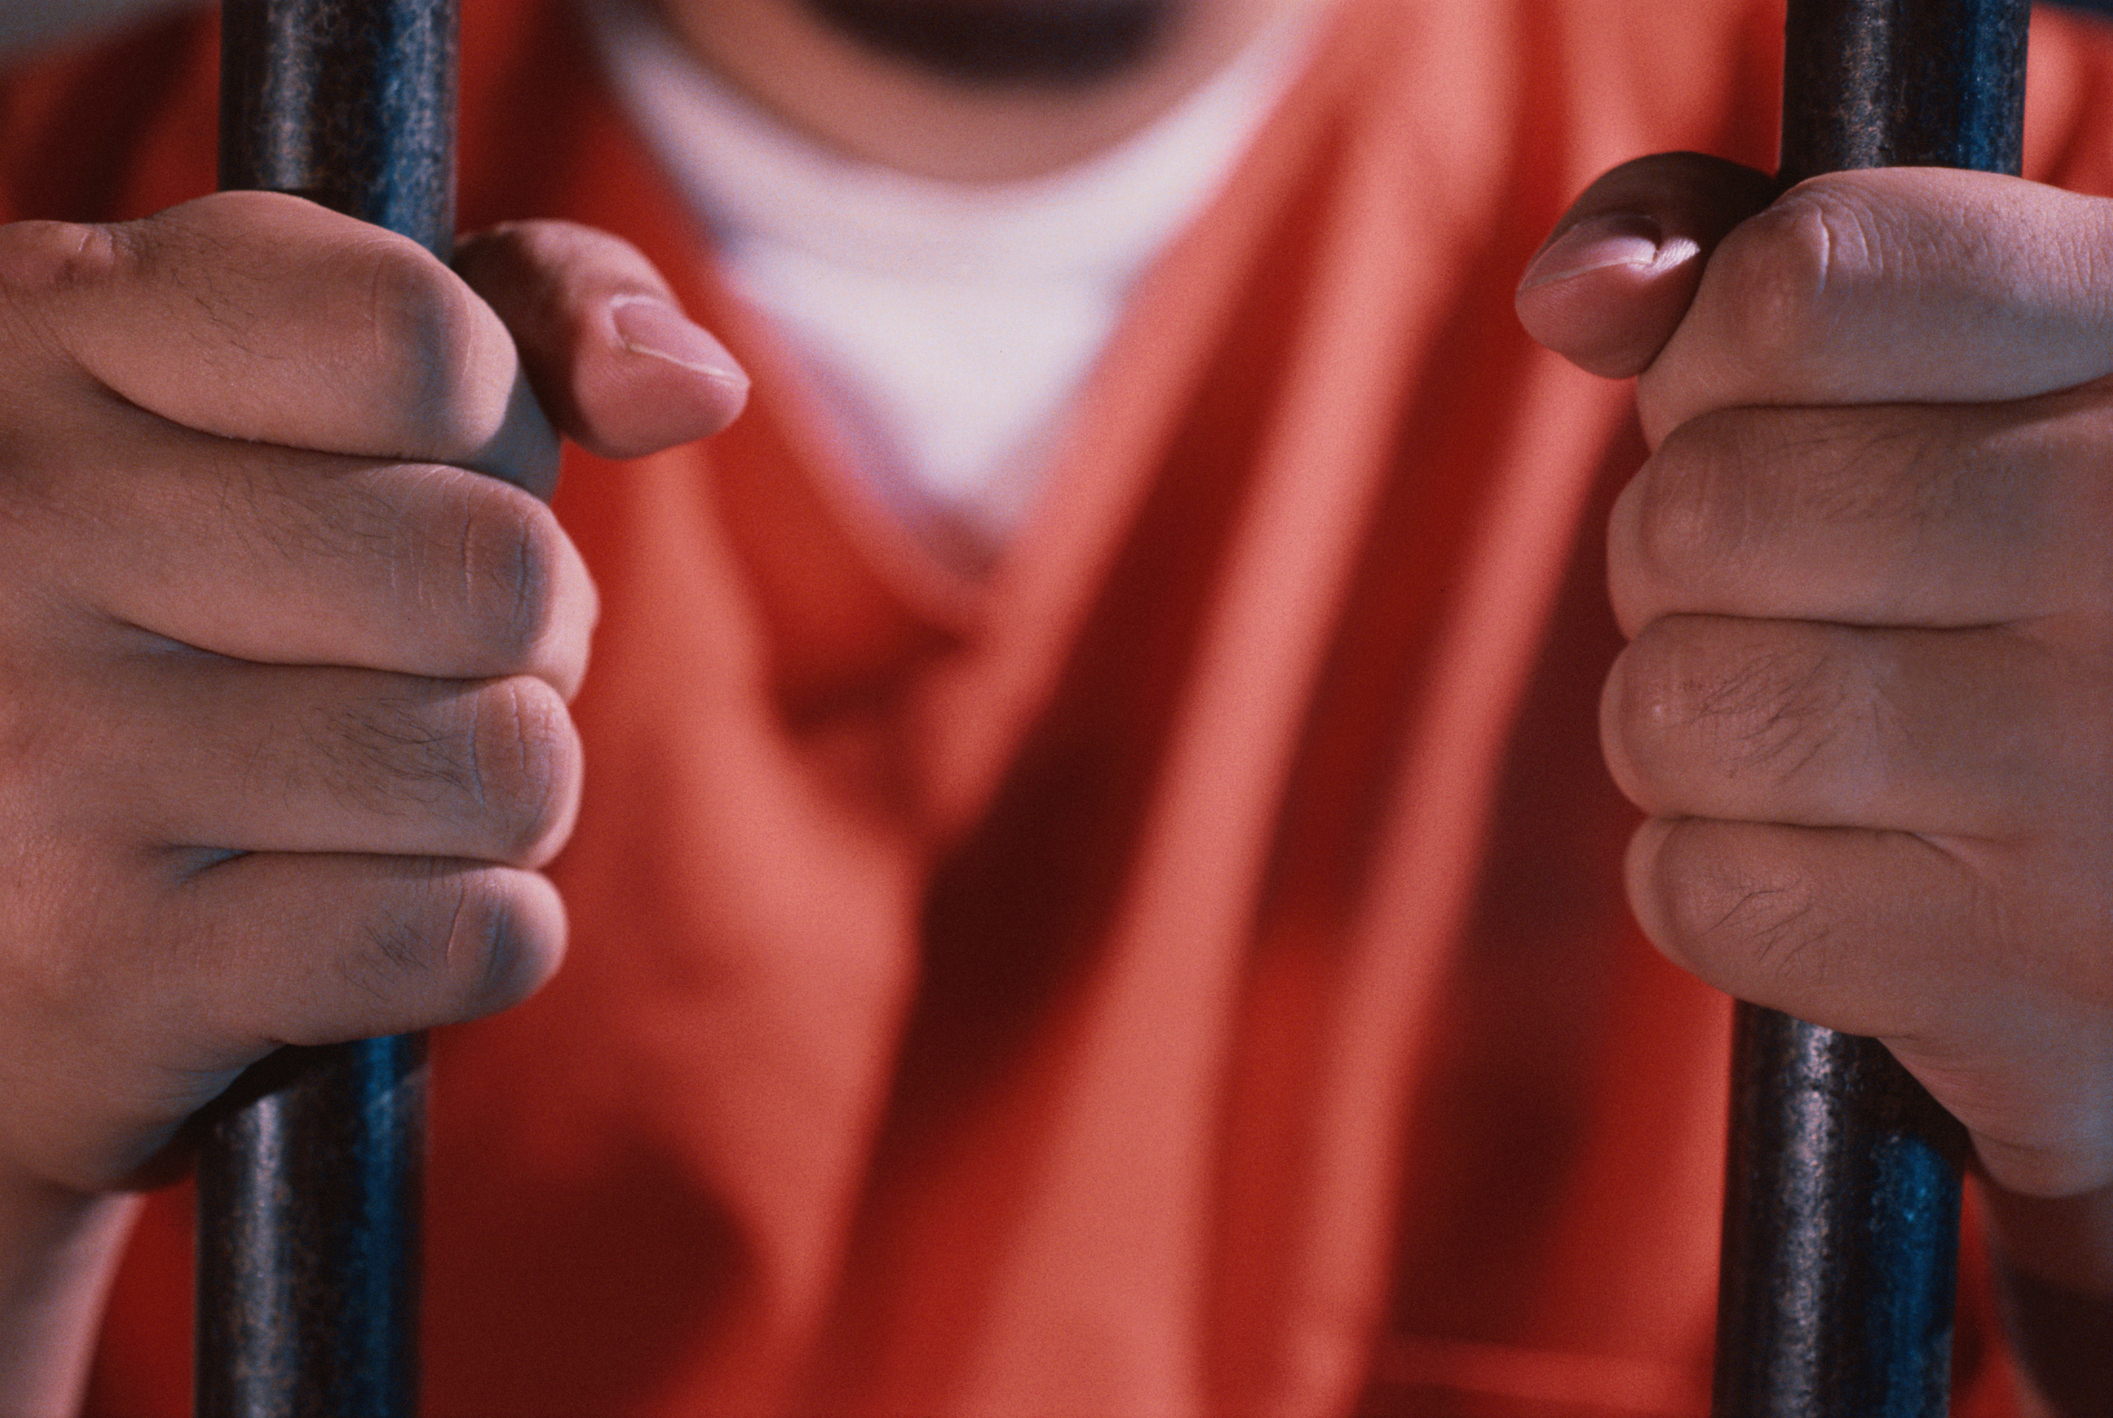 Person holding onto jail bars, focus on hands with an orange prison jumpsuit in the background